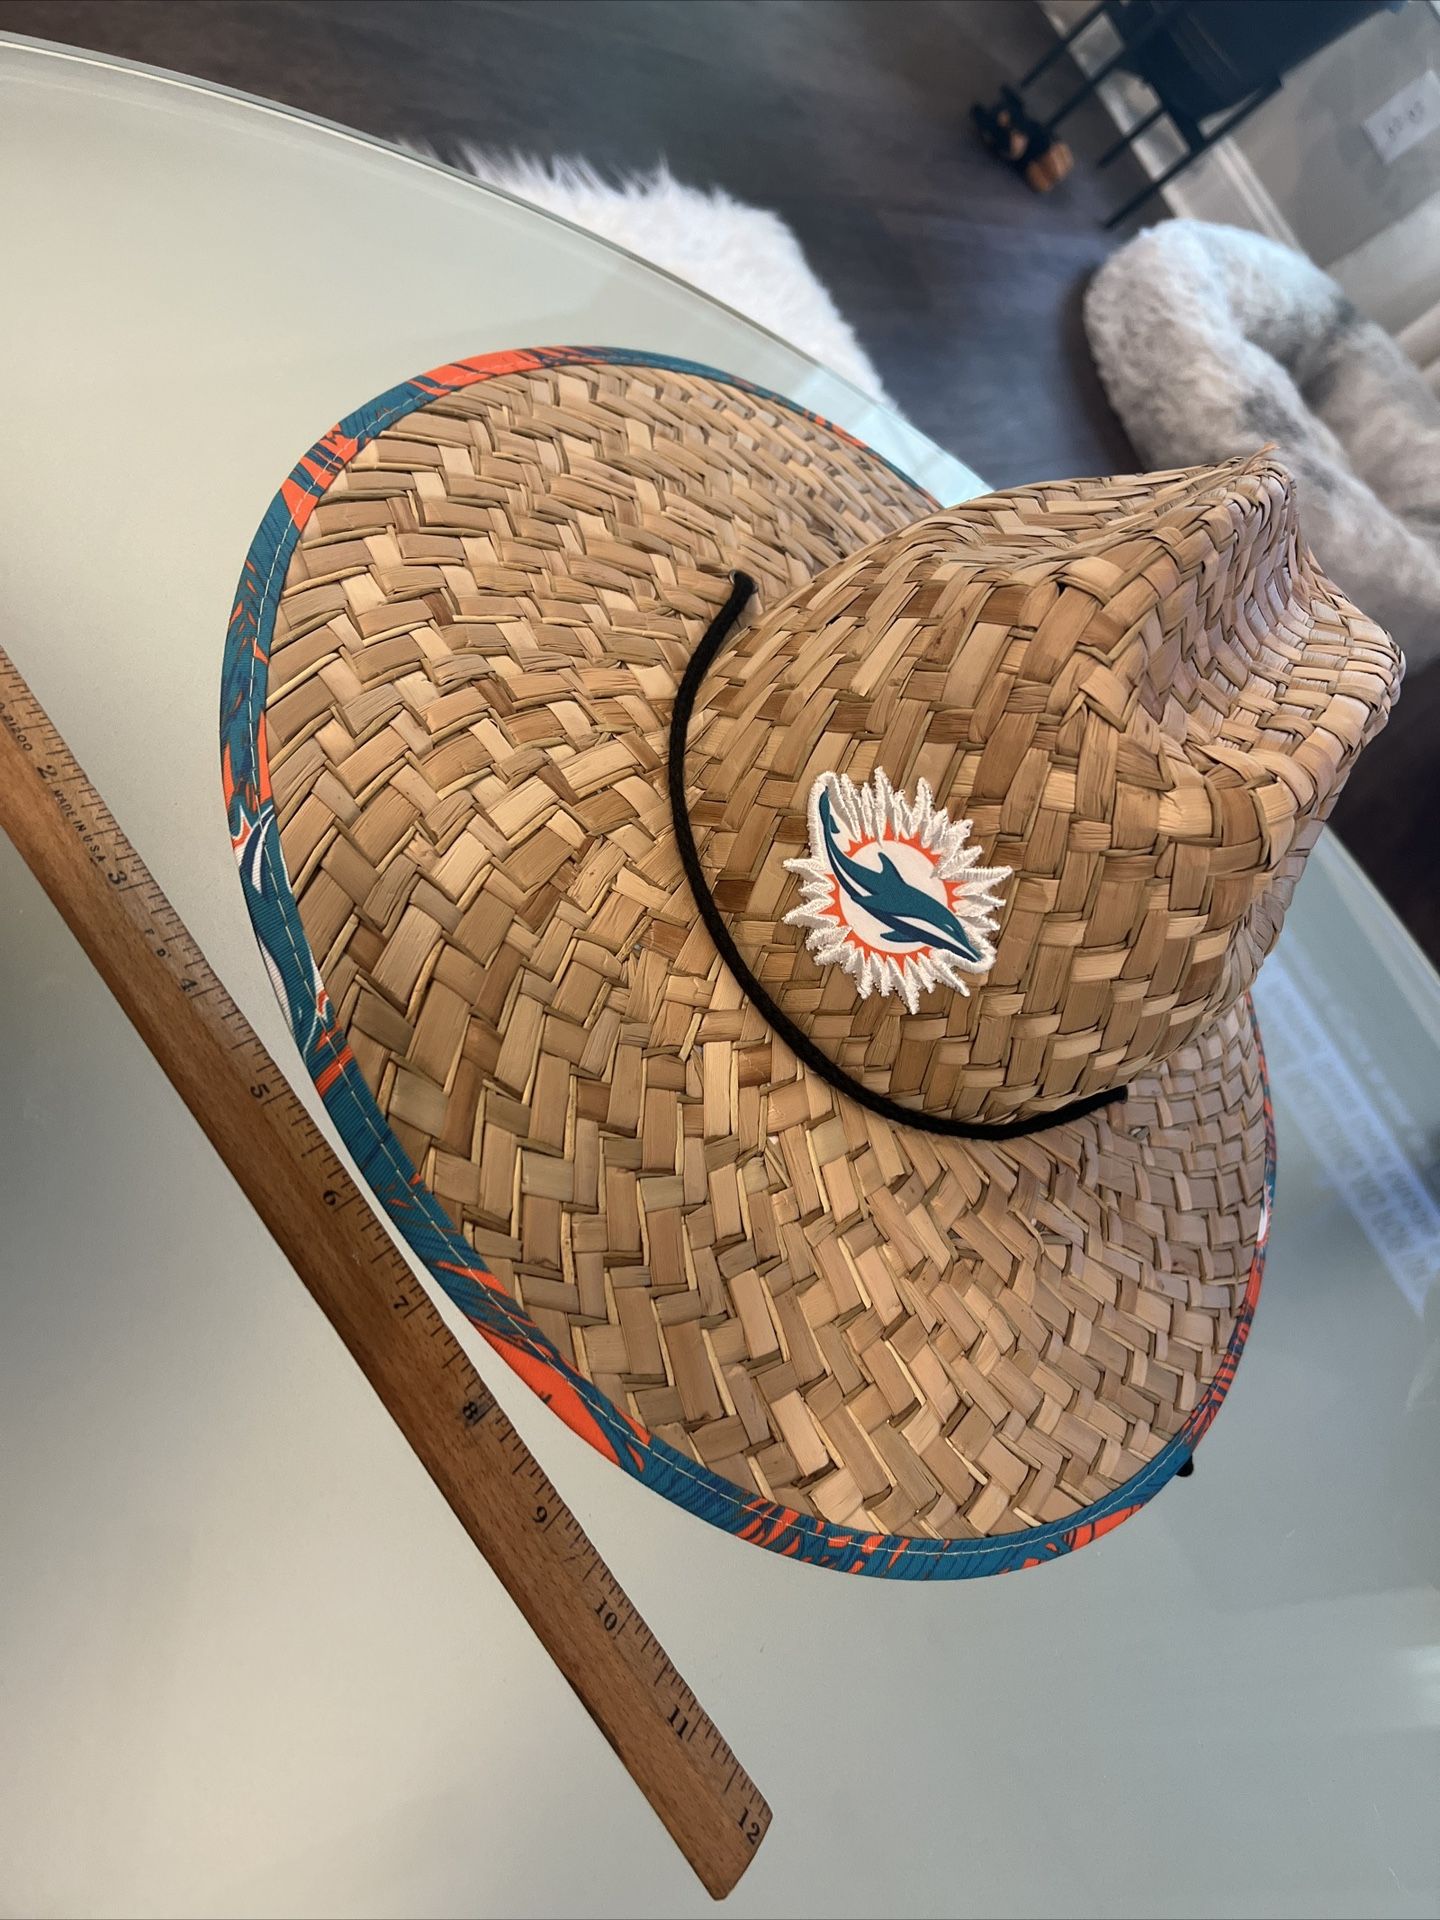 Miami Dolphins Unisex Fisherman,lifeguard,Gardening,Coaches Straw Hat approx 14”